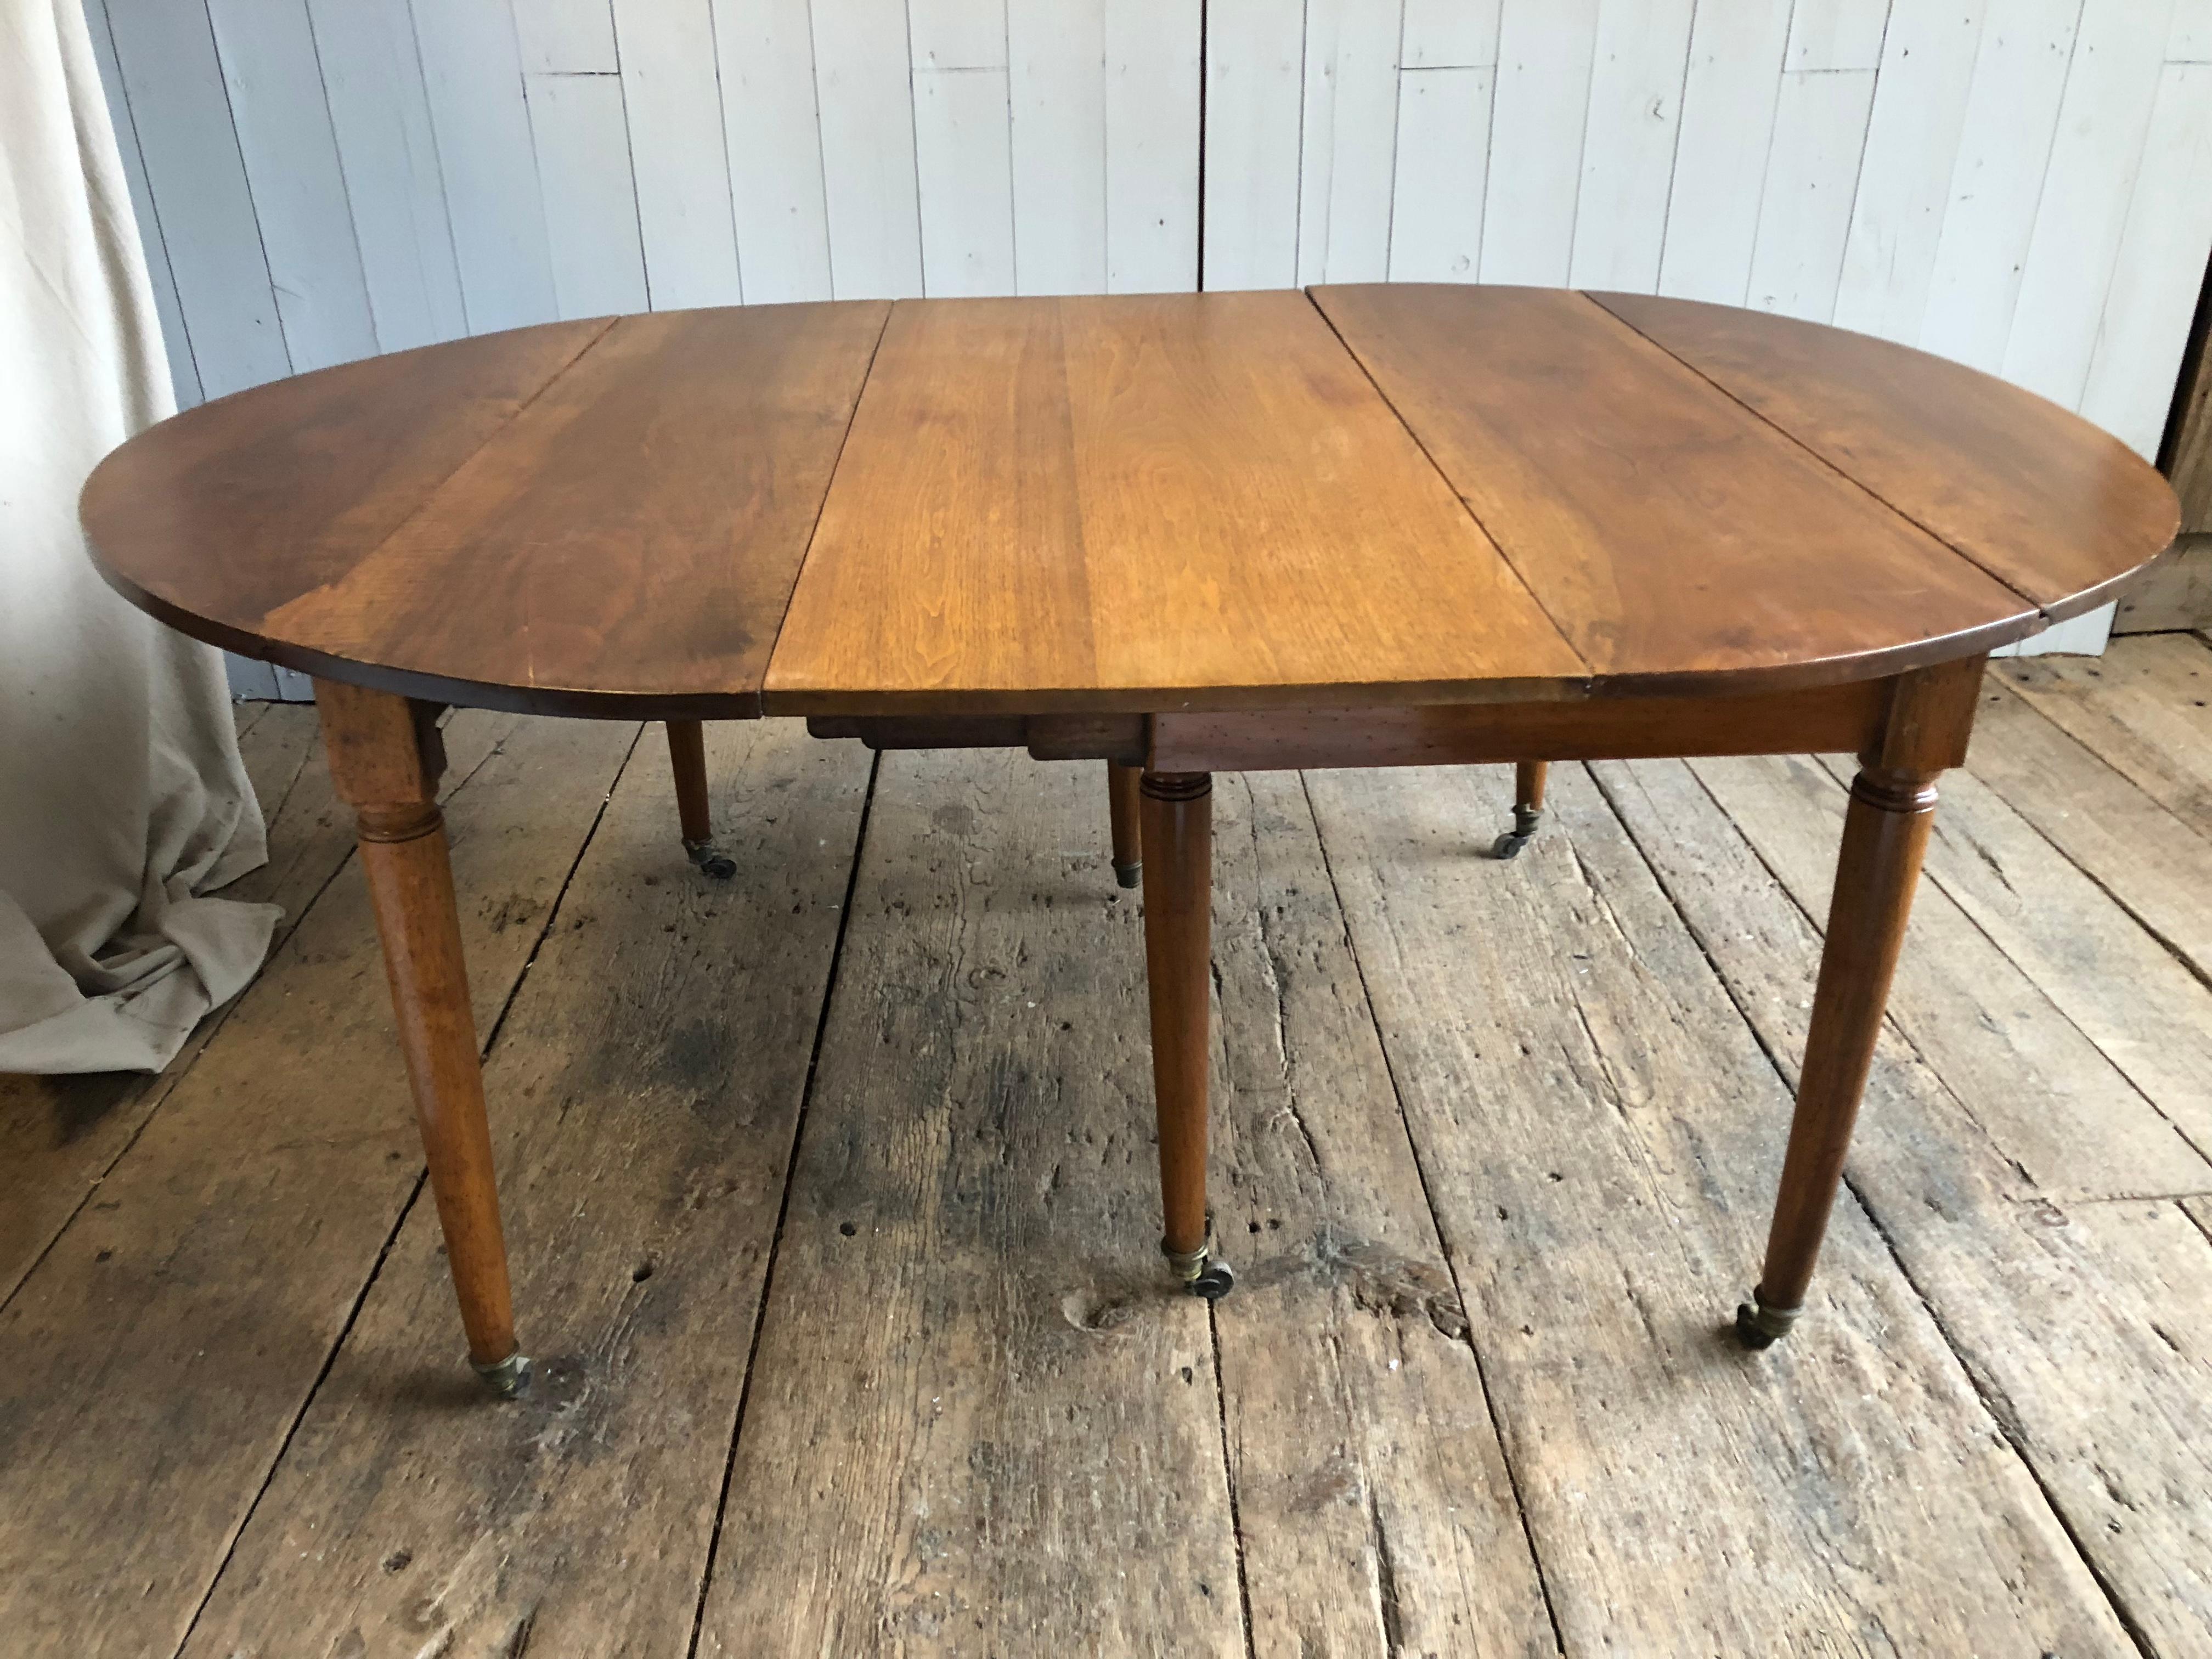 A French Directoire Period, circa 1800, drop-leaf expandable dining table in light walnut, with additional leaf (later). The table has 6 simple turned and tapered legs on casters two of which are a pair of center support legs for when expanded.